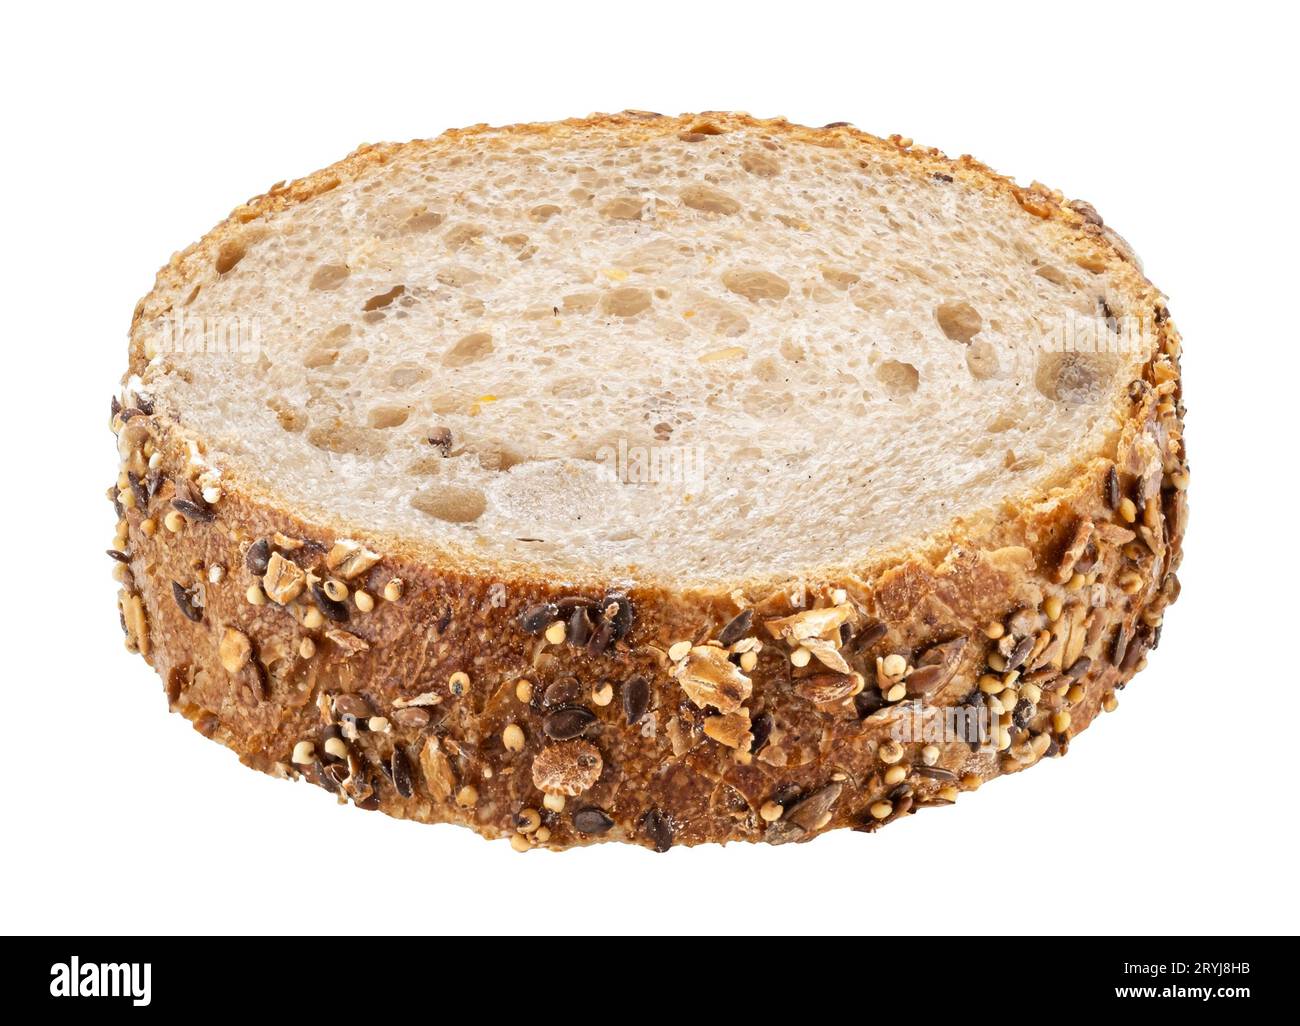 Wholegrain bread slice with oats isolated on white background Stock Photo